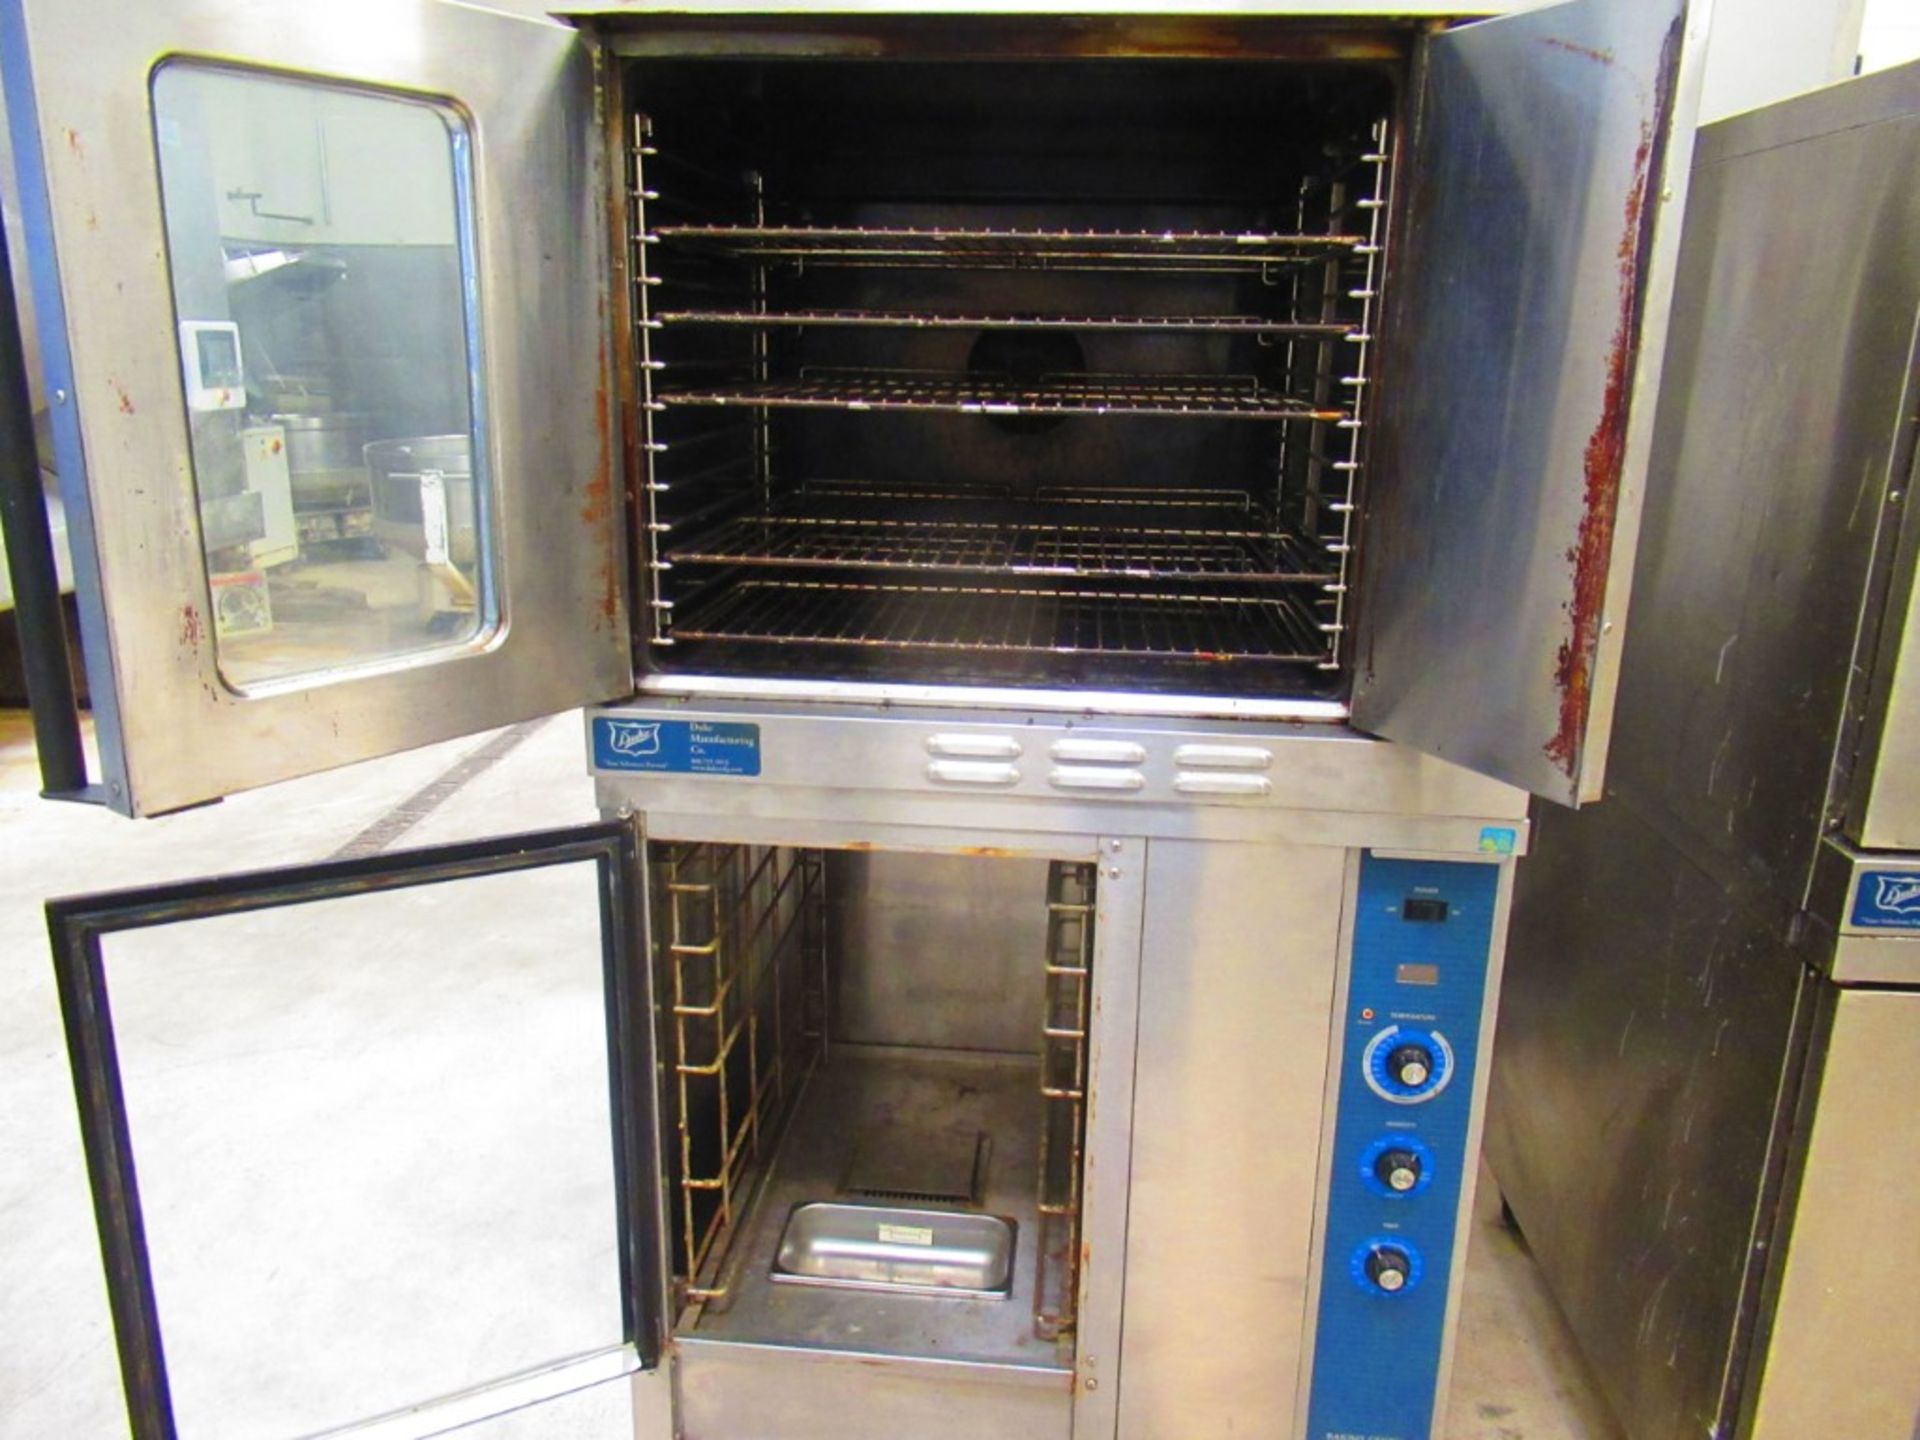 Oven - Image 5 of 6